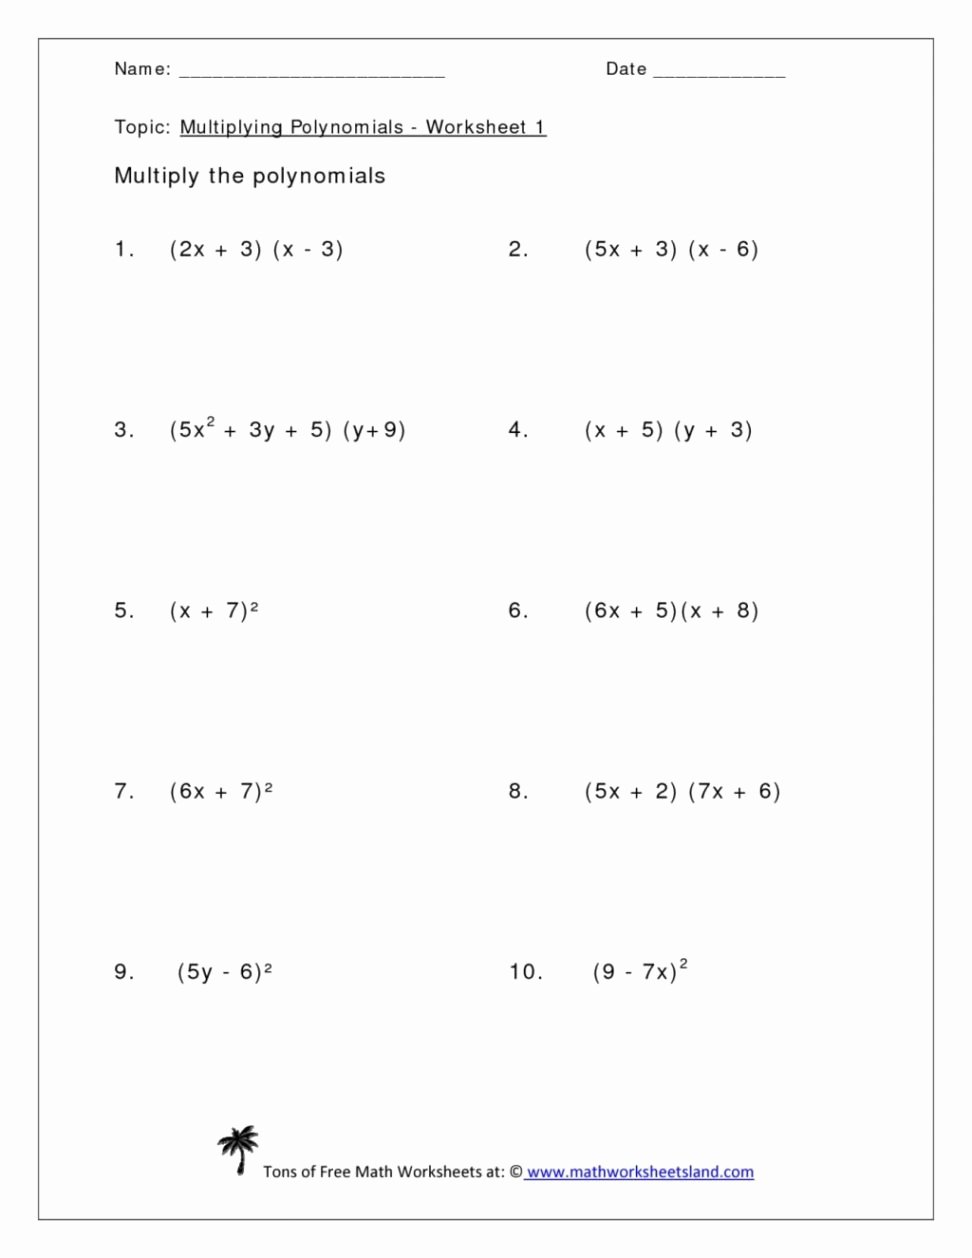 Scientific Notation Worksheet with Answers Luxury Mathworksheetsland Scientific Notation Multiplication and